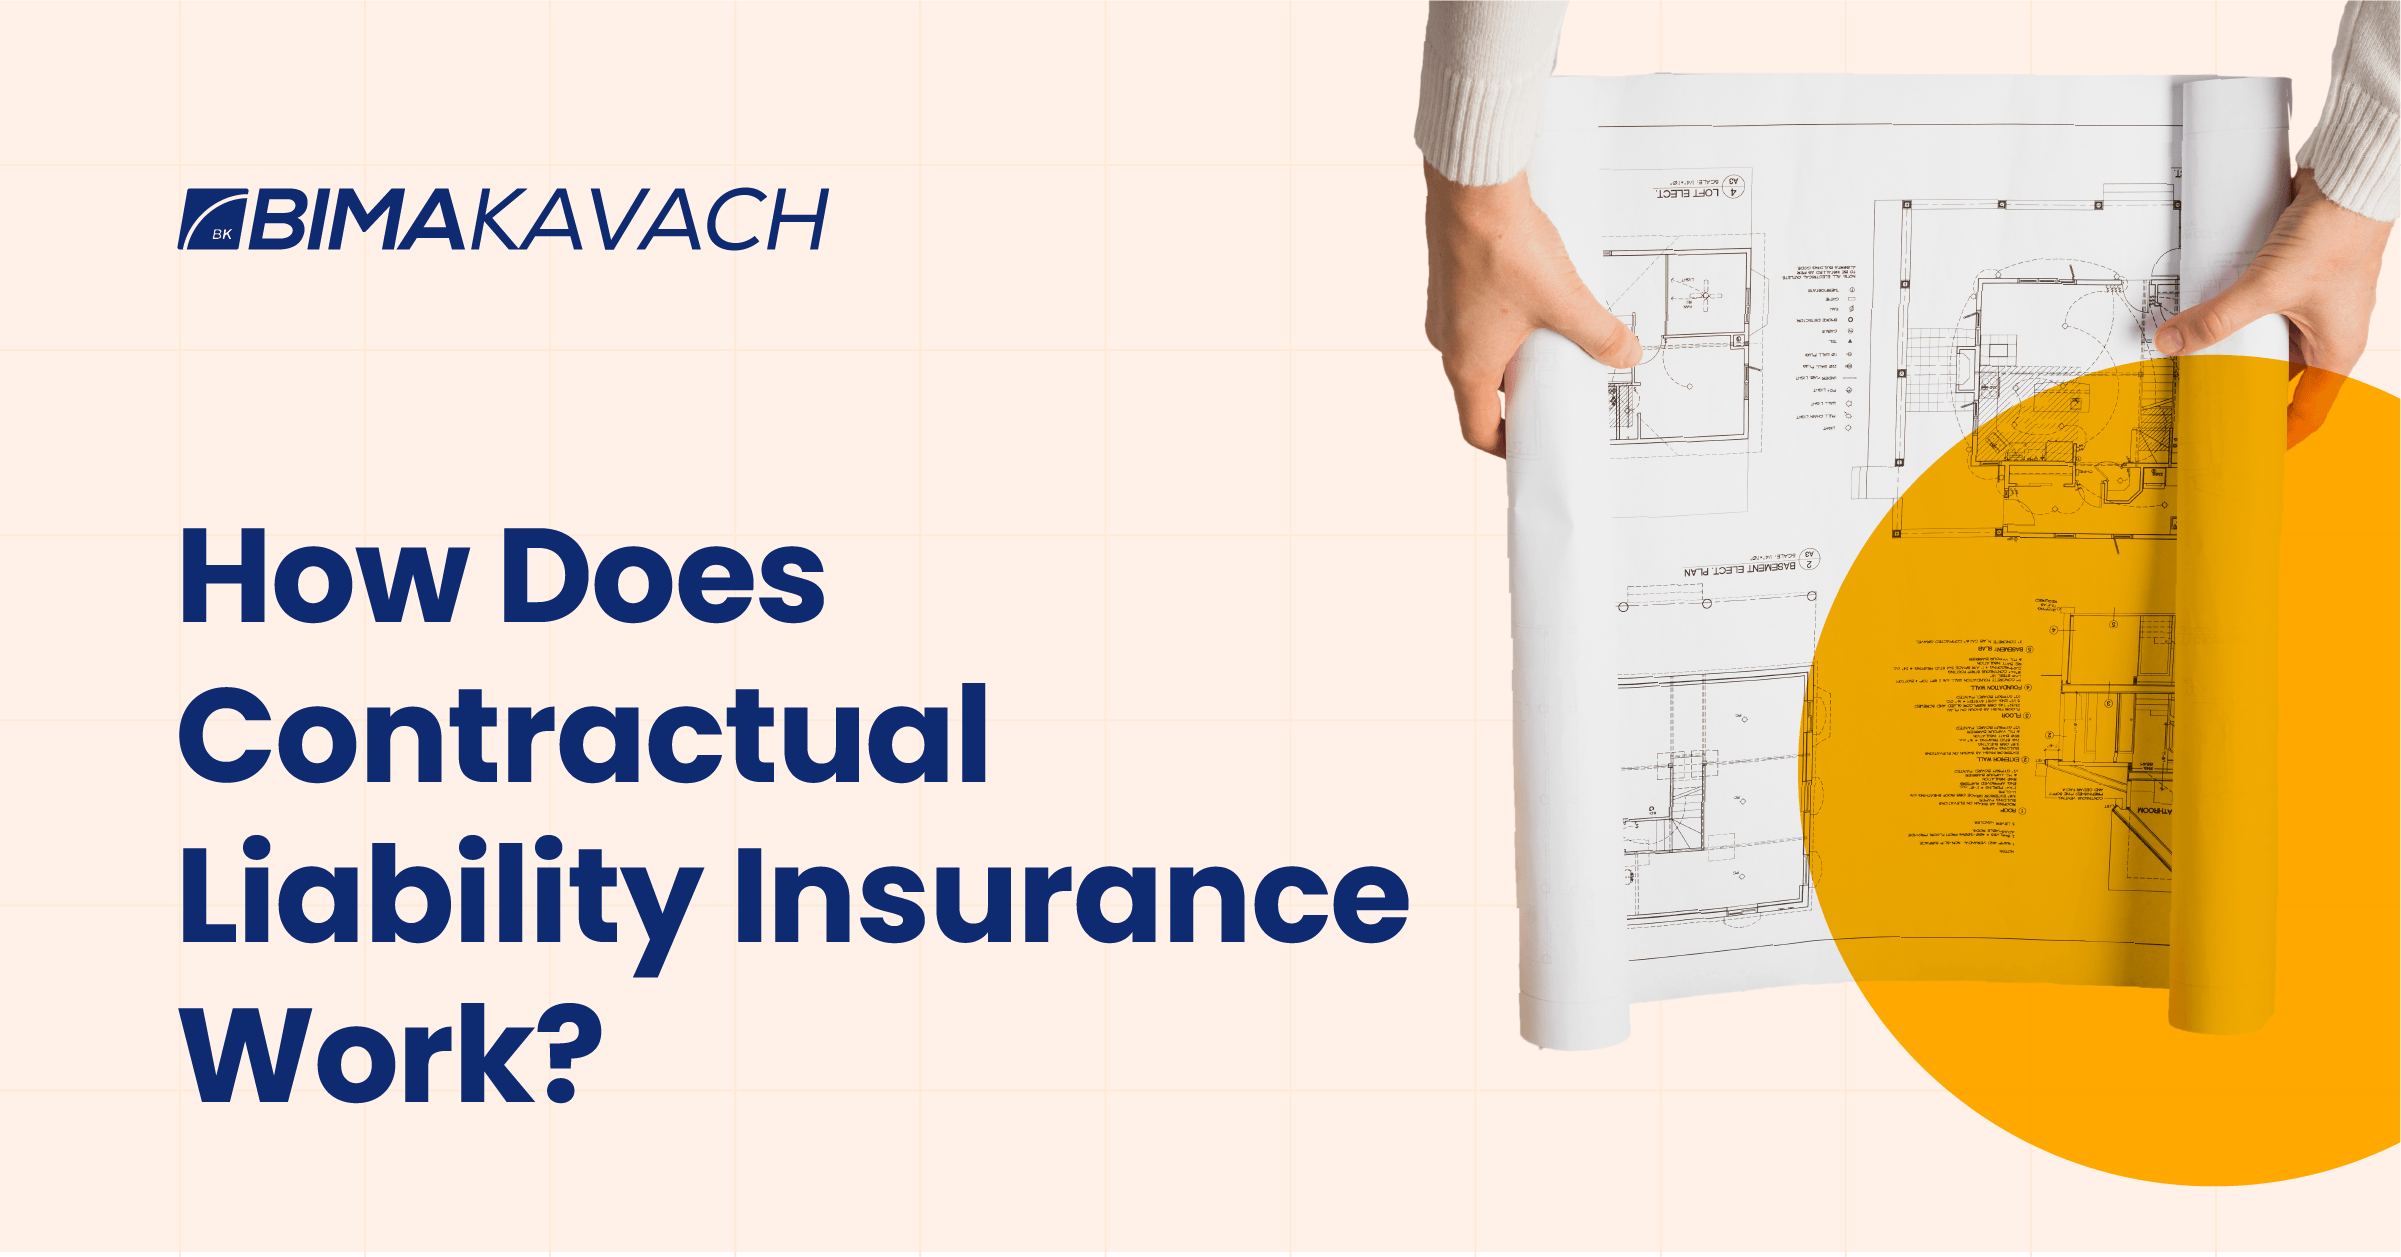 How Does Contractual Liability Insurance Work?